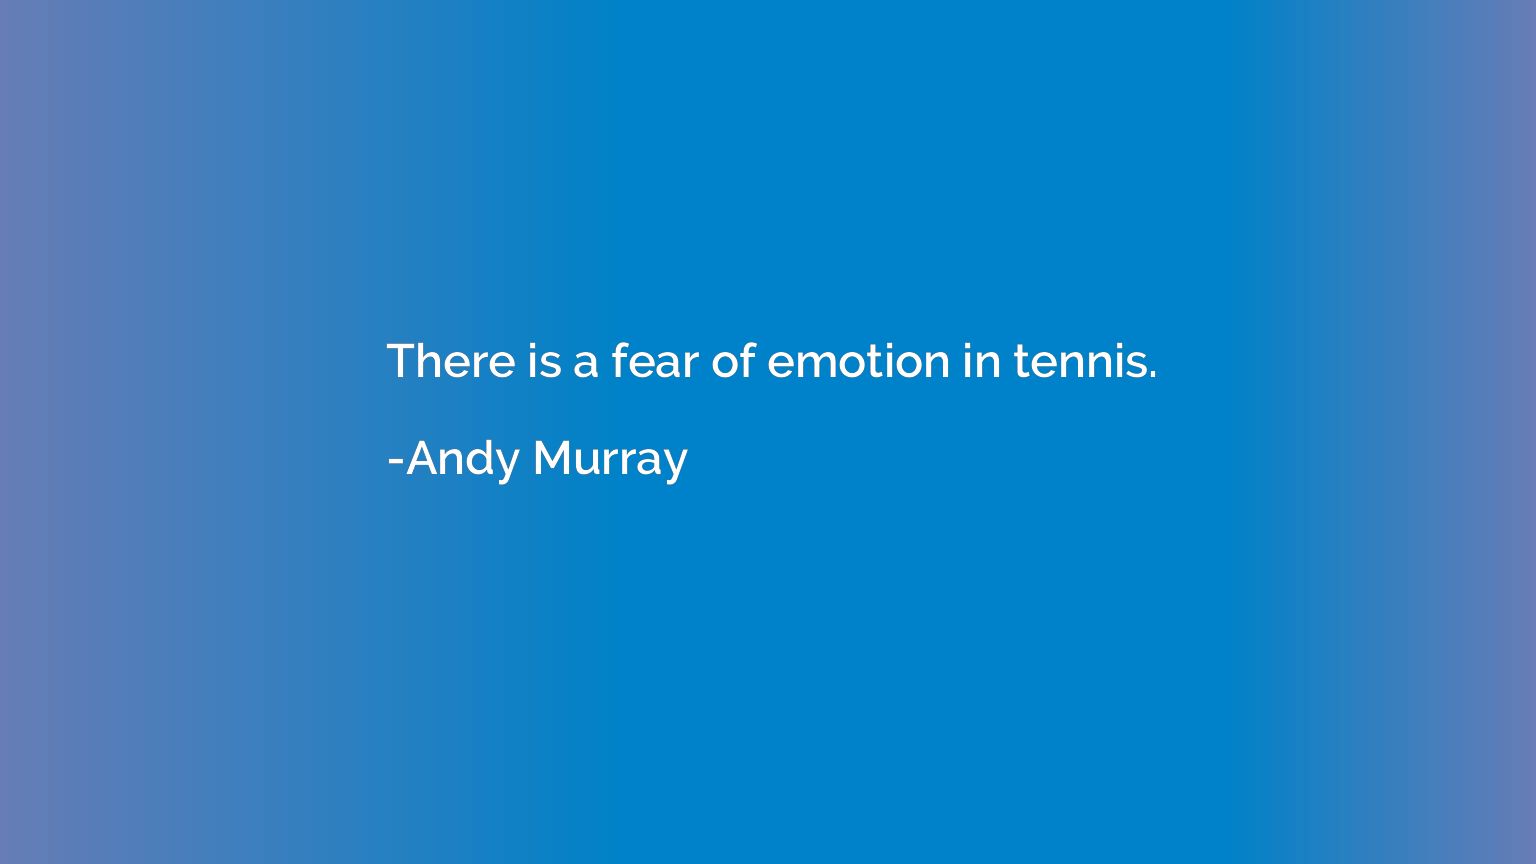 There is a fear of emotion in tennis.